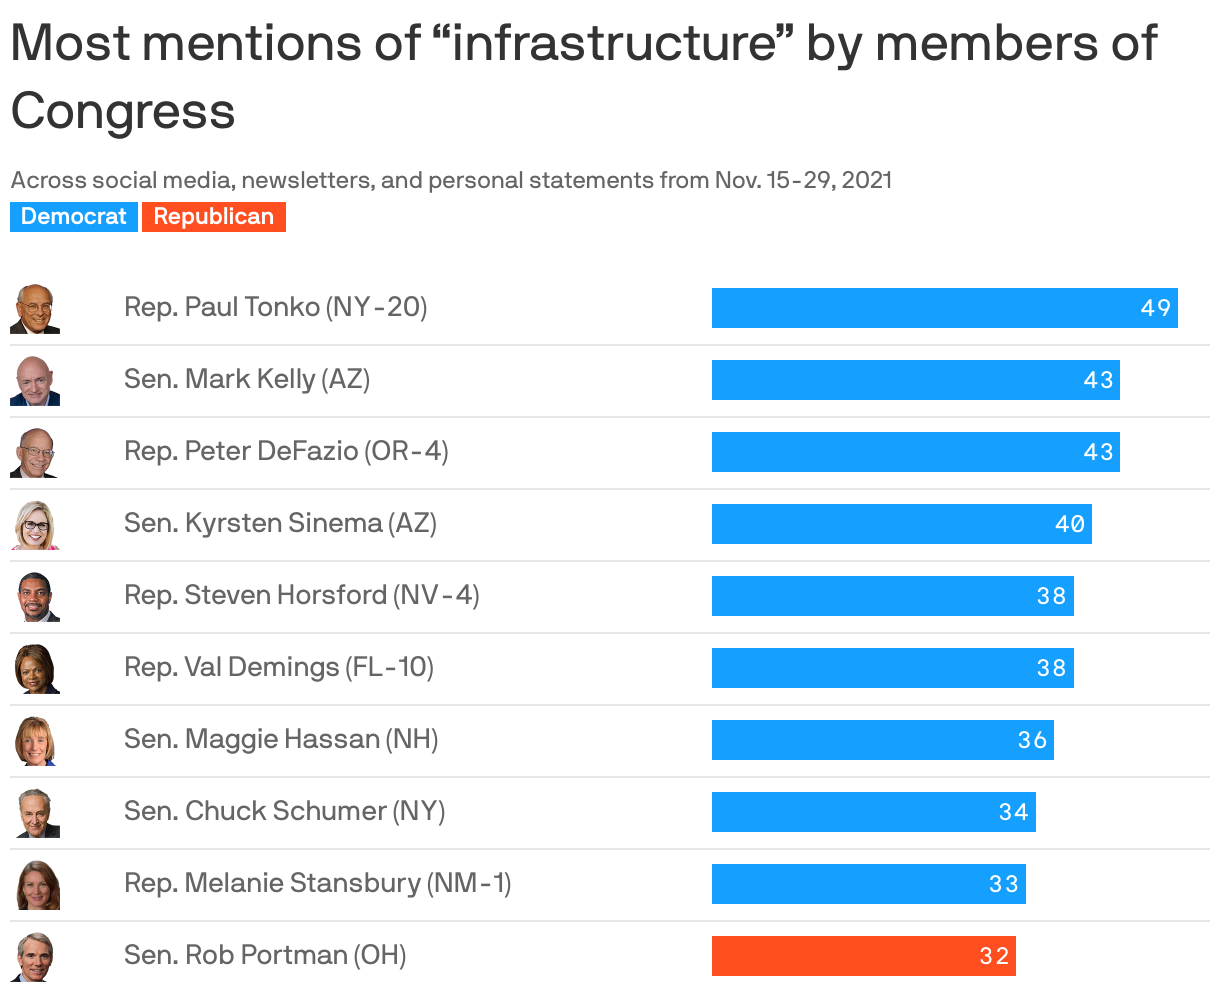 Most mentions of “infrastructure” by members of Congress